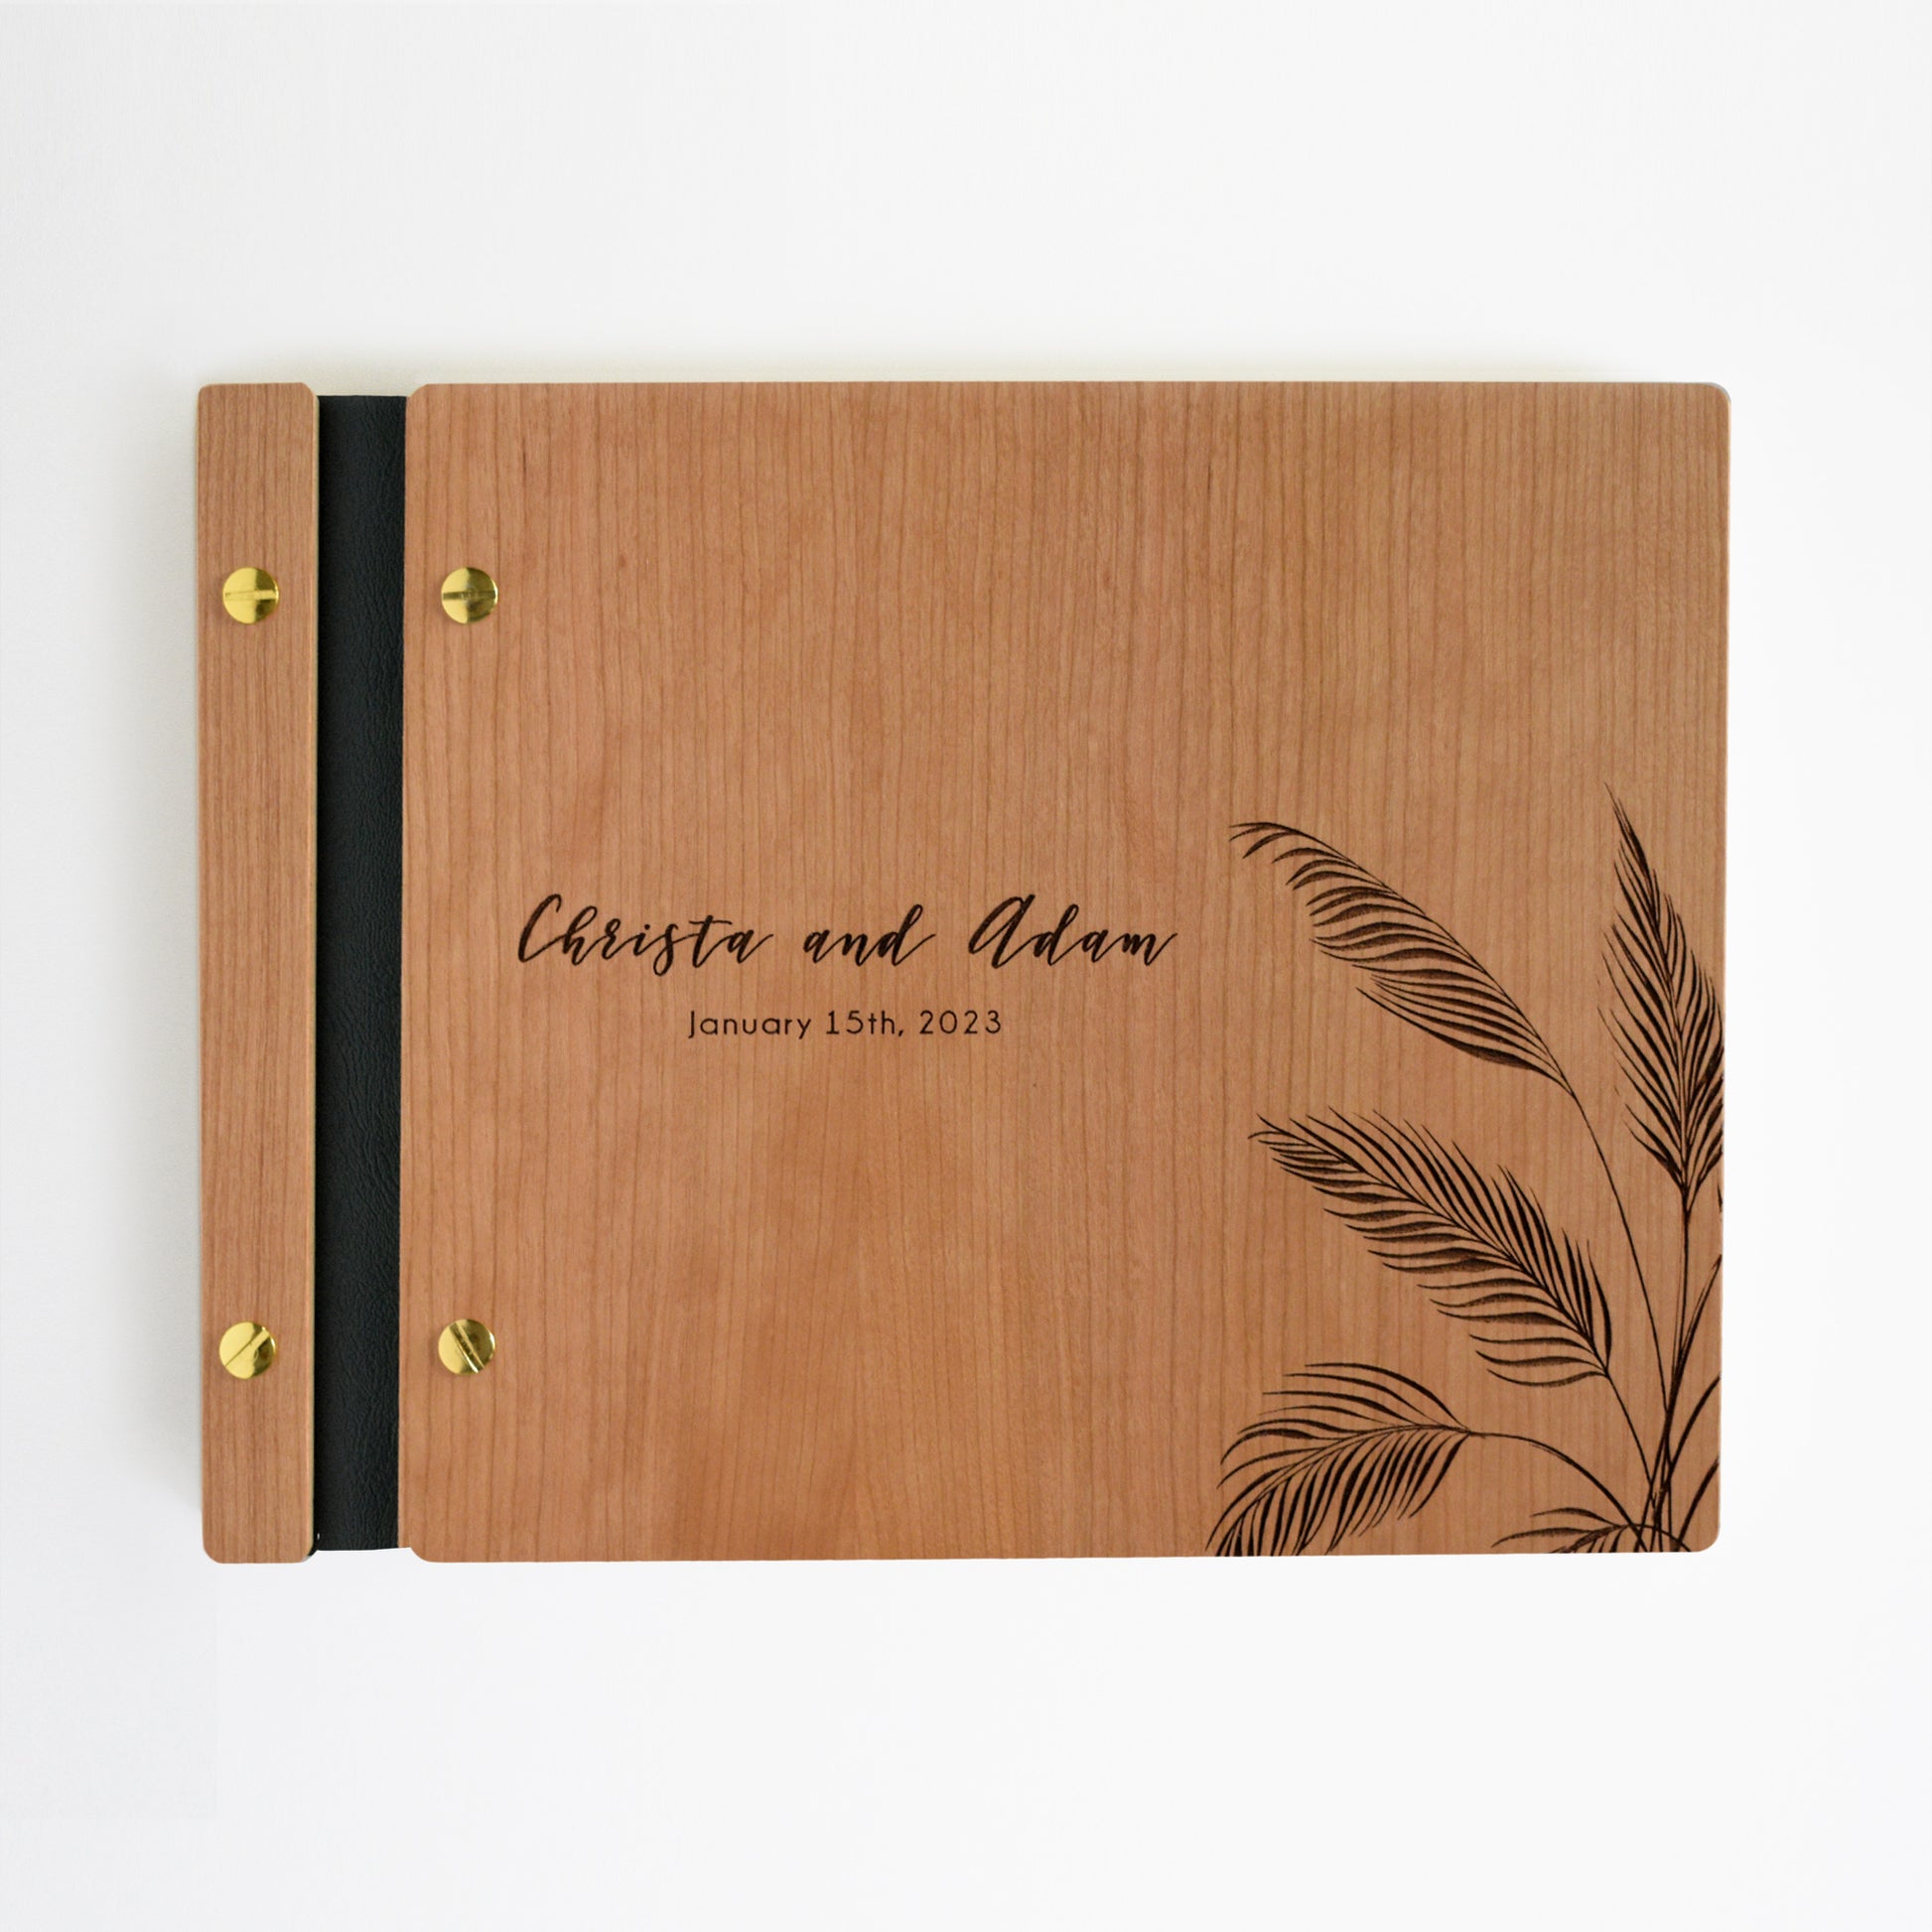 An 8.5x11" guest book lies on a table. Made of cherry wood, black vegan leather binding, and copper hardware. The front cover reads “Christina and Adam, January 15th, 2023.” 